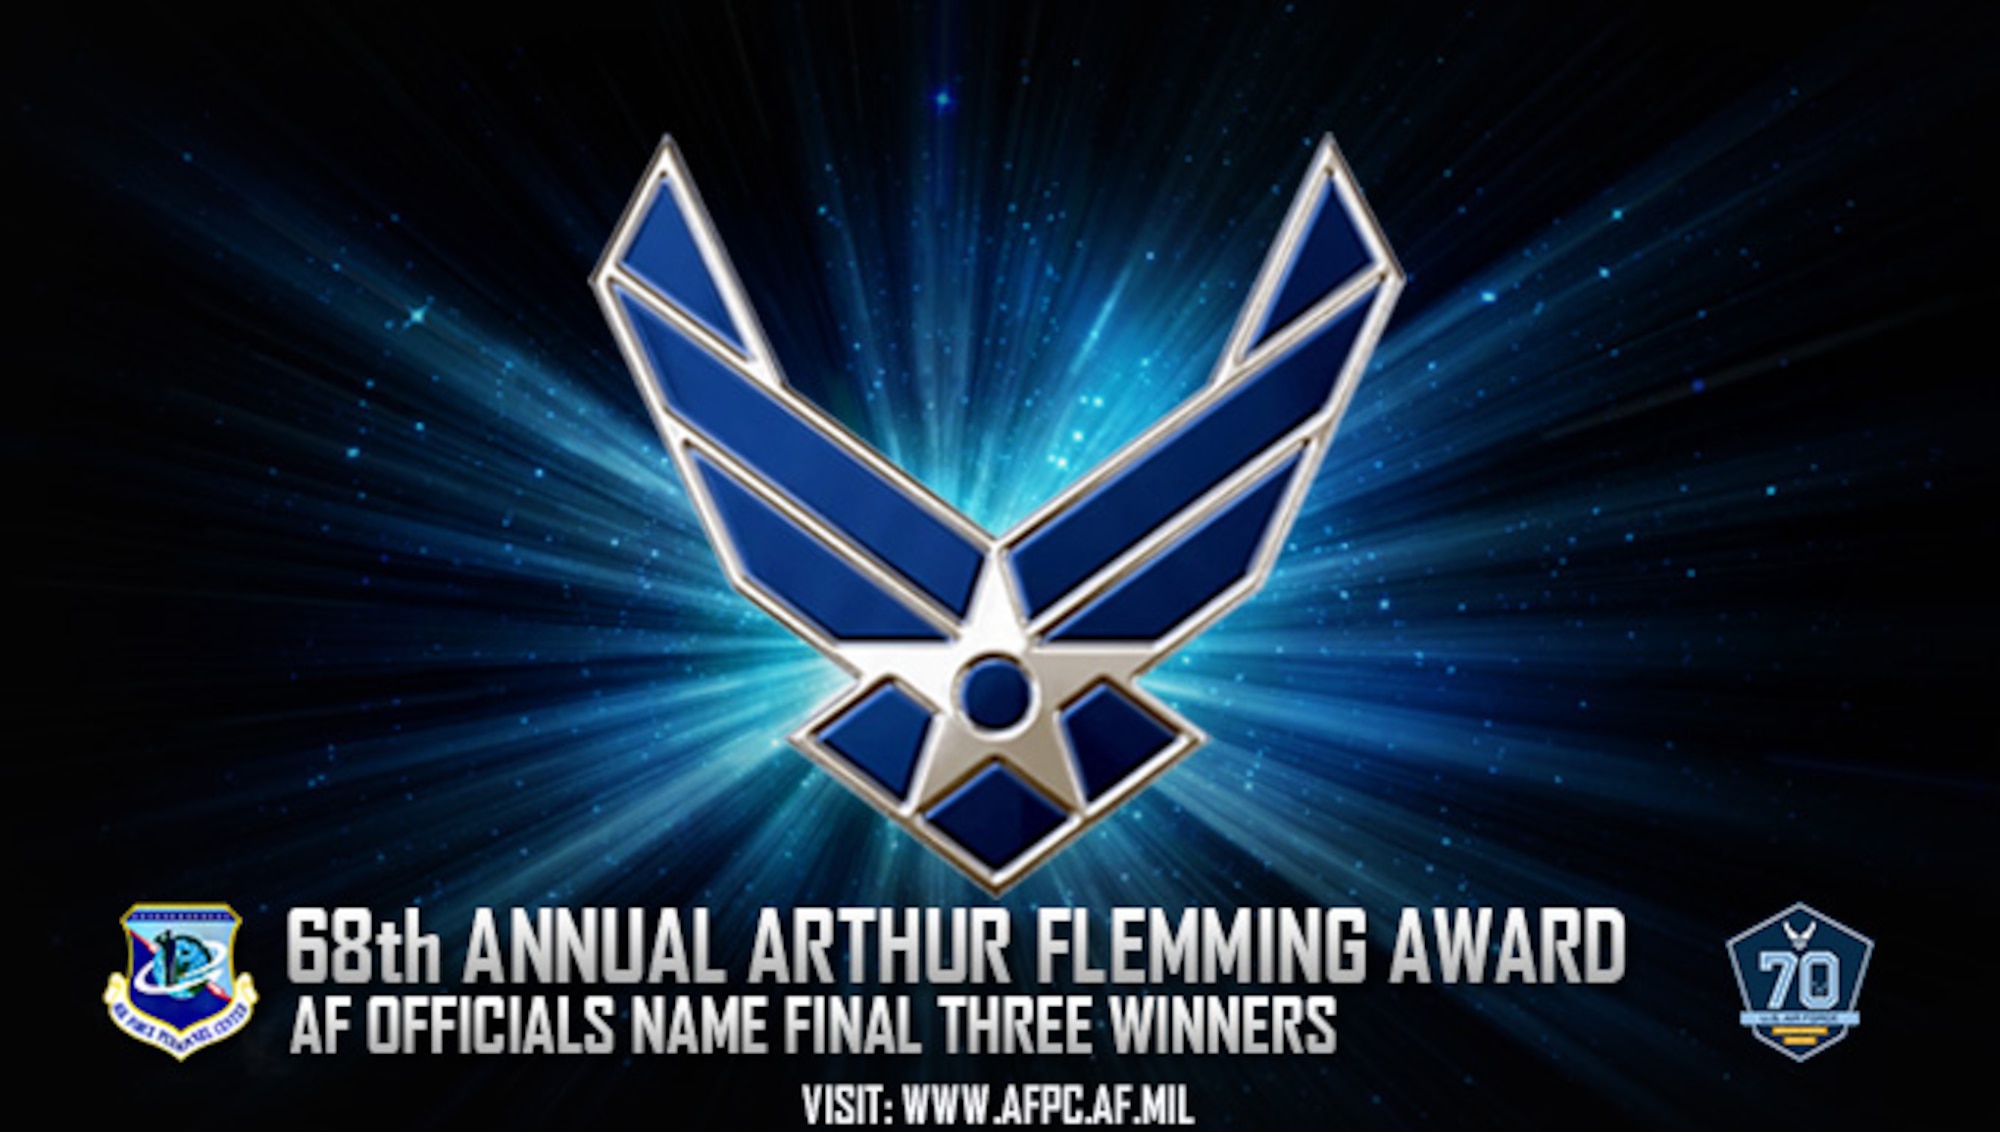 Air Force officials are pleased to announce the three recipients of the 68th Annual Arthur S. Flemming Award. The three distinguished winners are scheduled to be honored by the award commission at George Washington University, Washington D.C. (U.S. Air Force graphic by Staff Sgt. Alexx Pons)